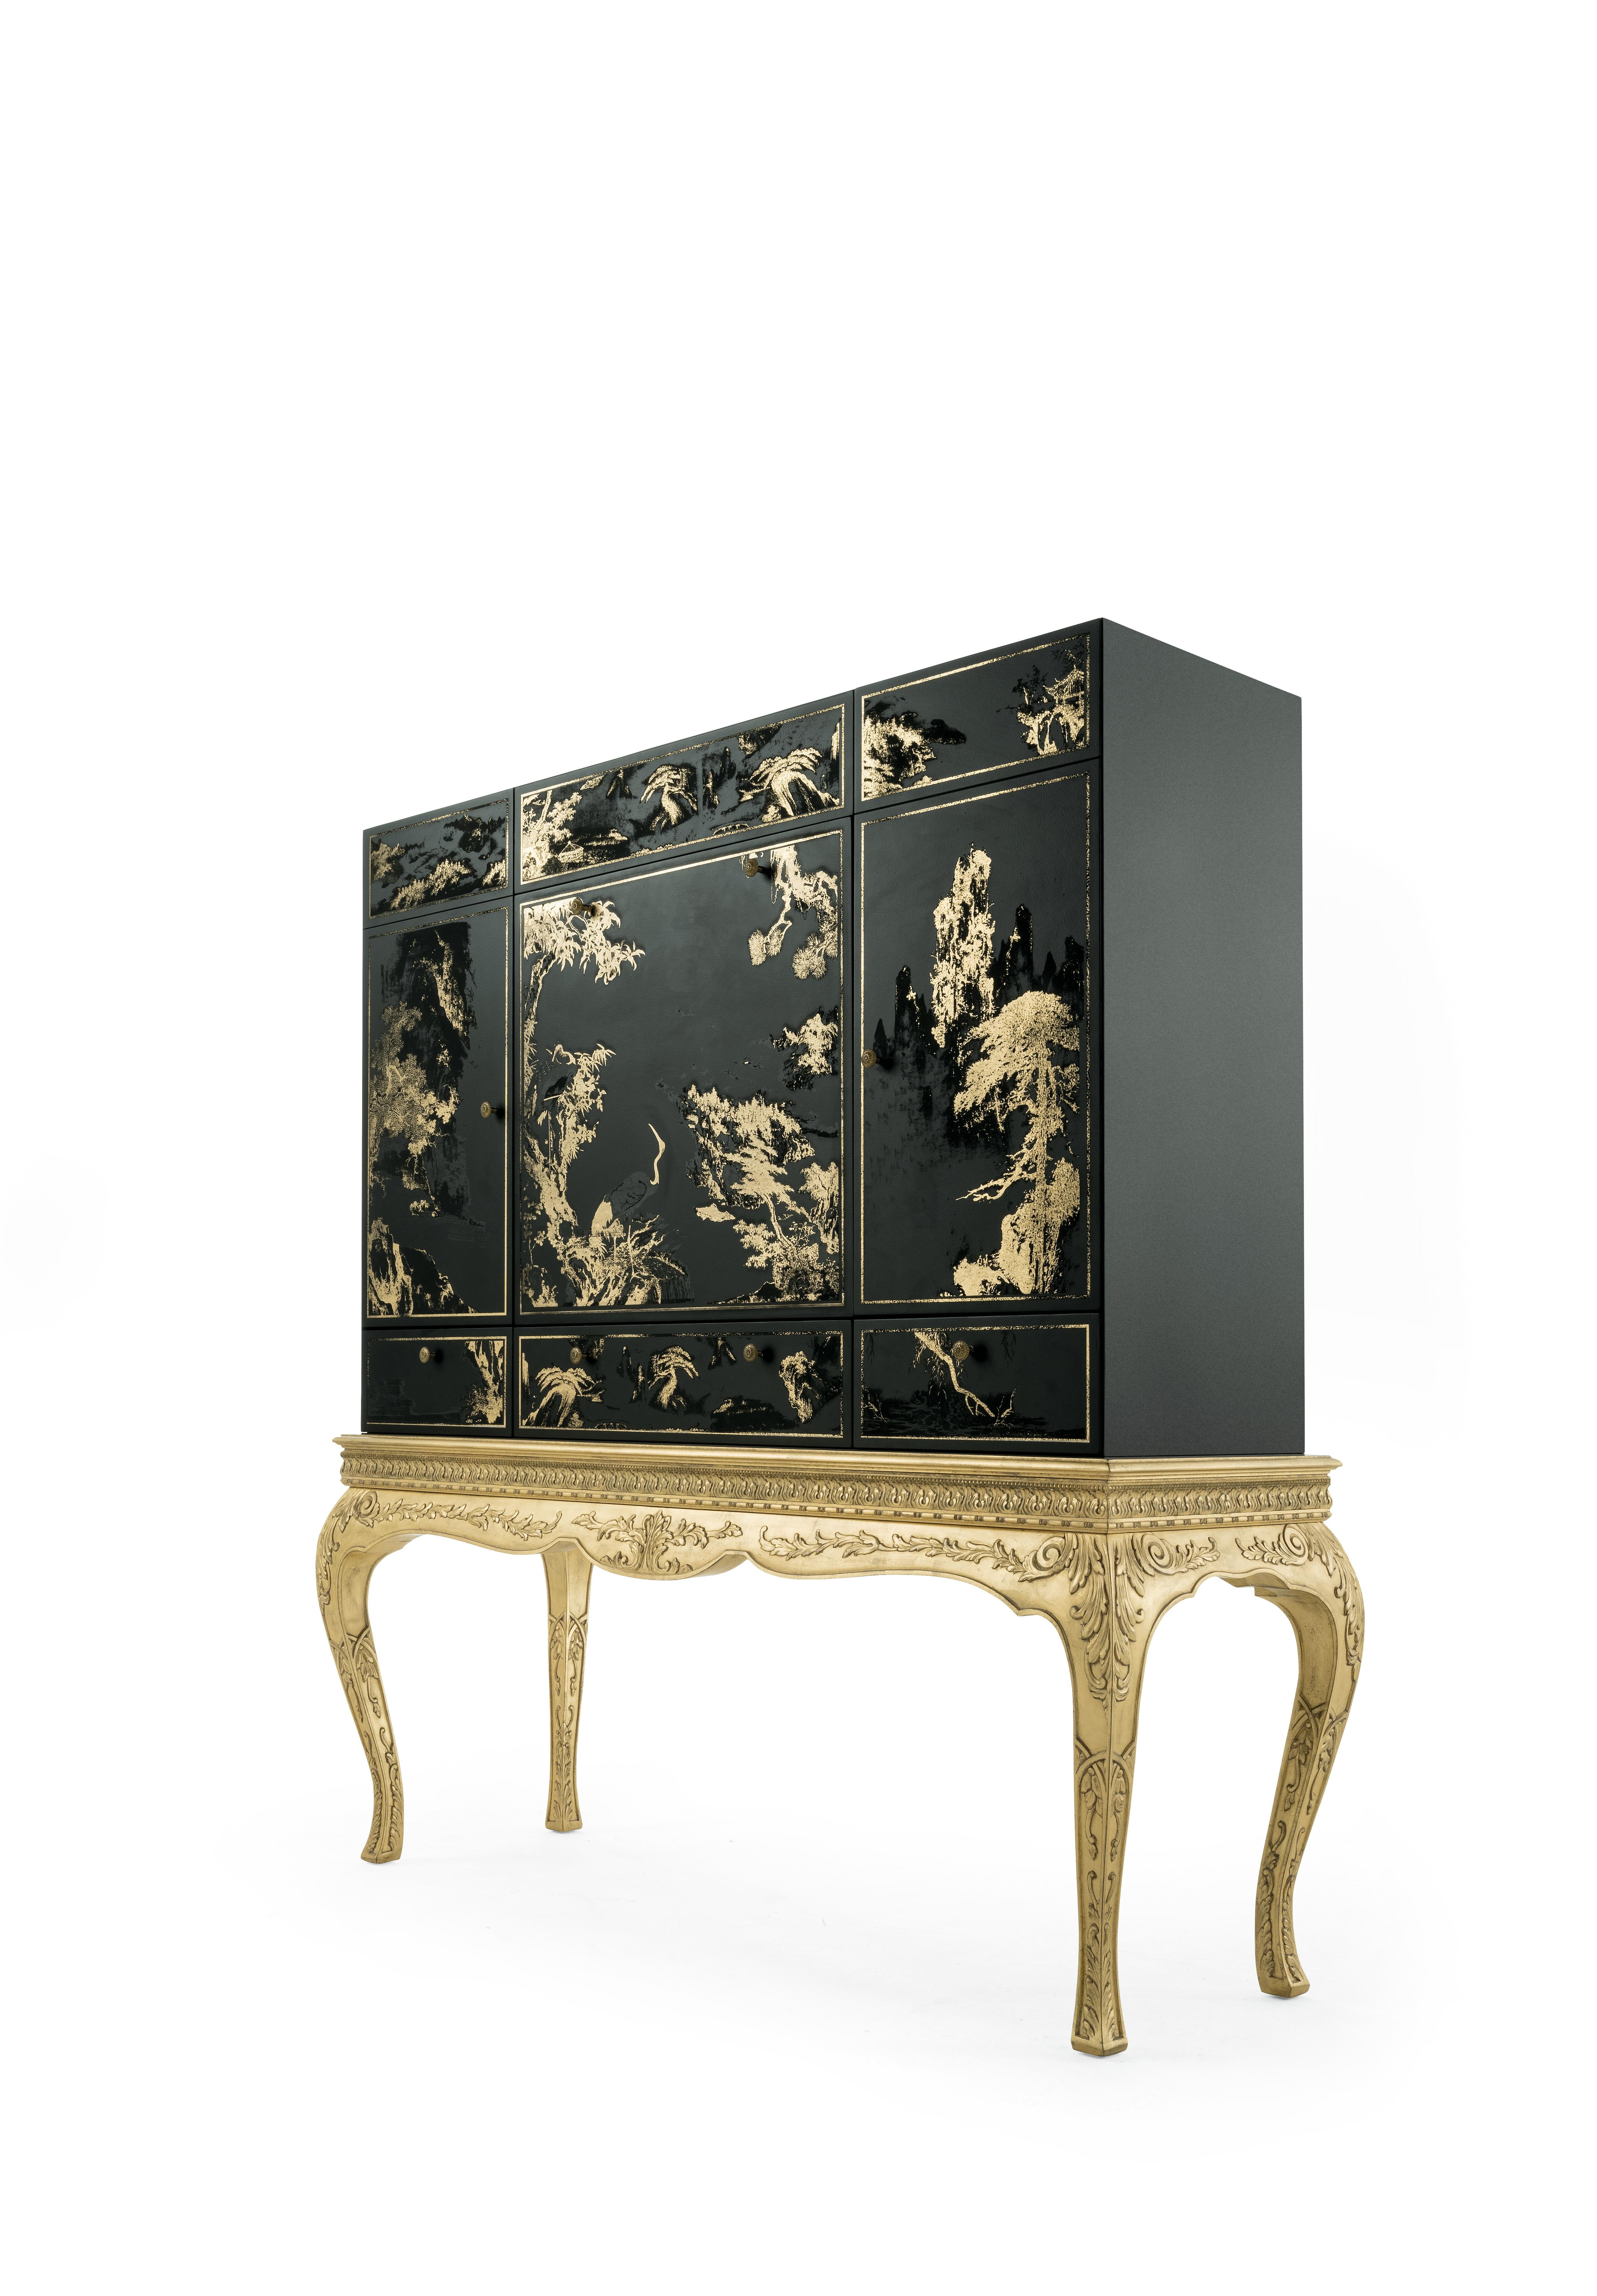 Brocart is a precious and decorative bar cabinet where classic style meets oriental inspirations. The hand-carved legs and decorative frame finished in patinated antique gold recall the baroque style, while the structure in black lacquered wood with